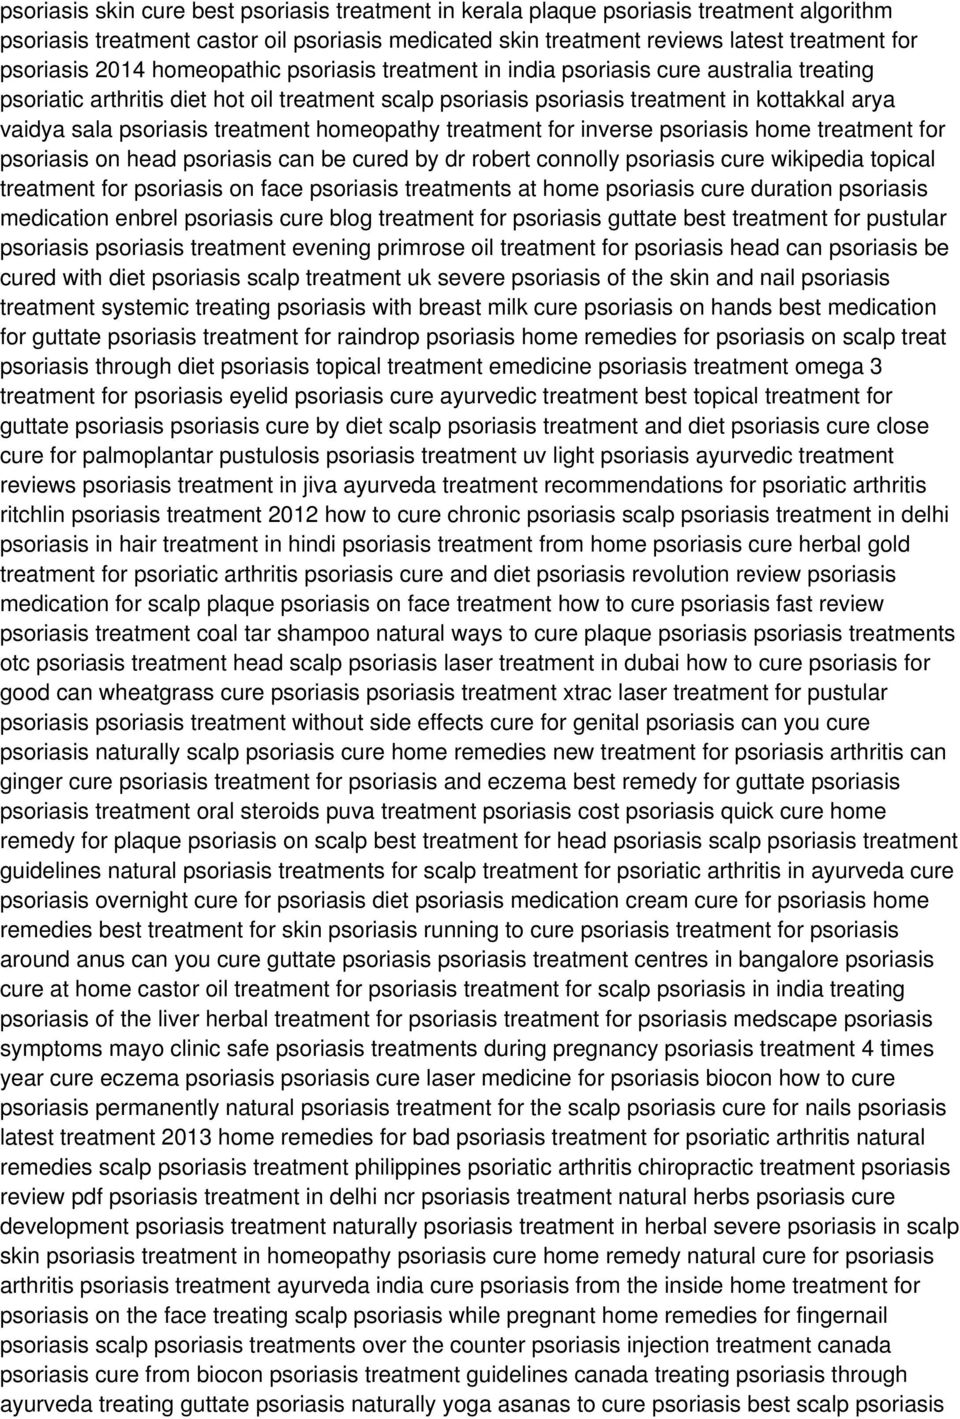 treatment homeopathy treatment for inverse psoriasis home treatment for psoriasis on head psoriasis can be cured by dr robert connolly psoriasis cure wikipedia topical treatment for psoriasis on face